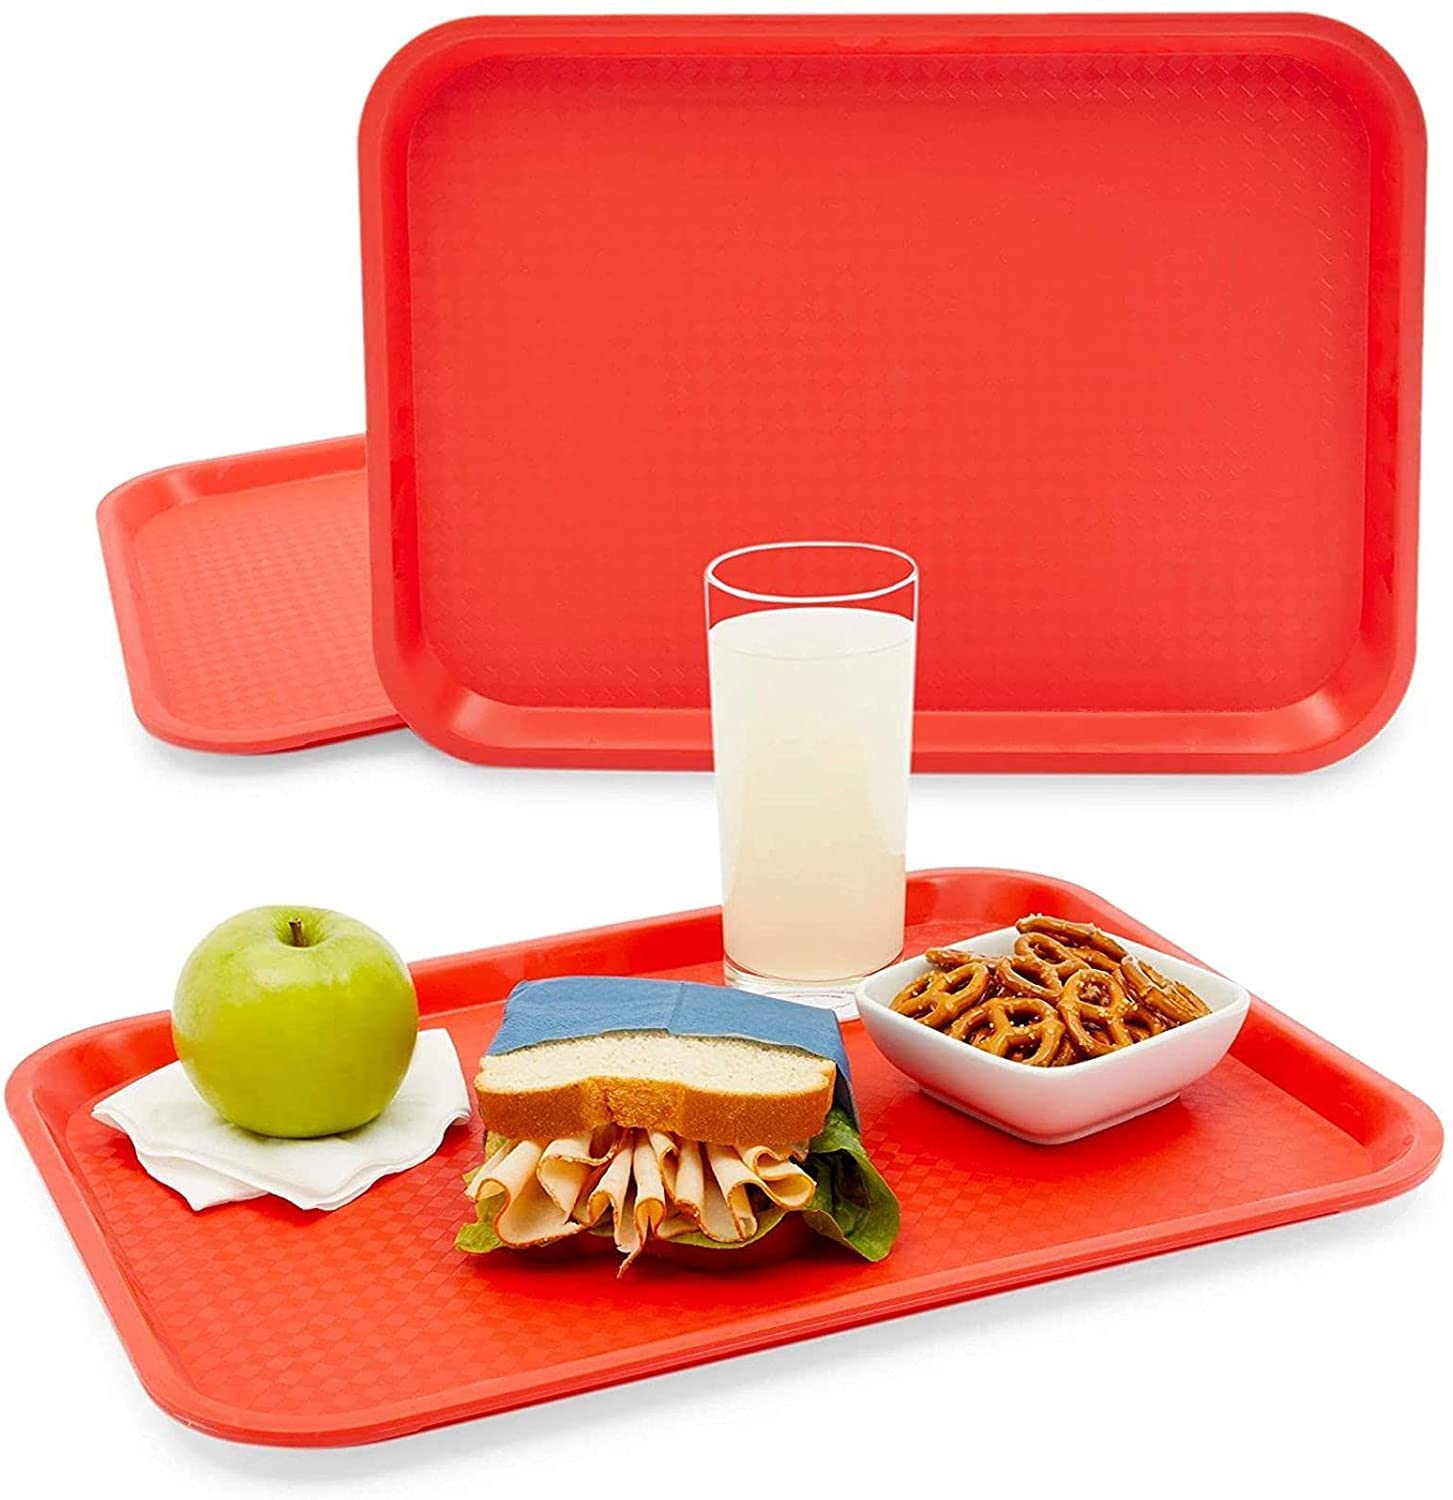 NJ Plastic Serving Platter Large Tray Unbreakable Snacks Tea Serving Tray Red Drink Breakfast Tea Dinner Coffee Salad Food for Dinning Table Home Kitchen (16 X 12 Inches) : Red 6 Pcs.